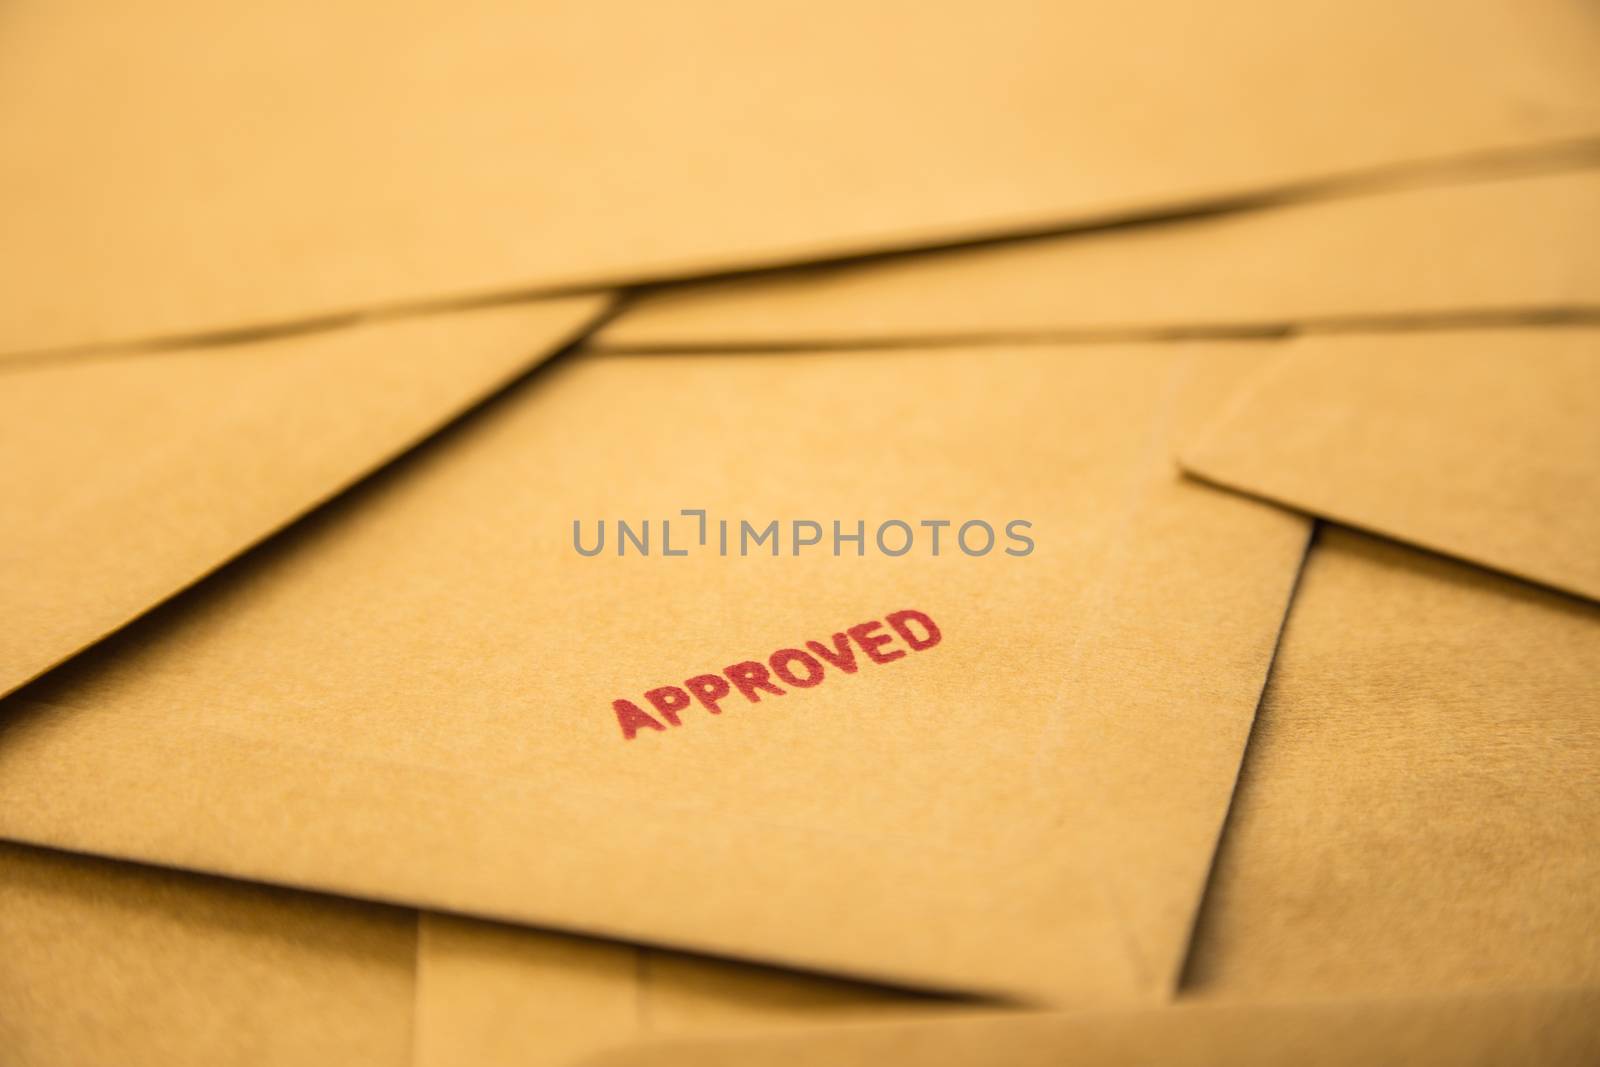 red approved sign on envelope, recruitment and human resources